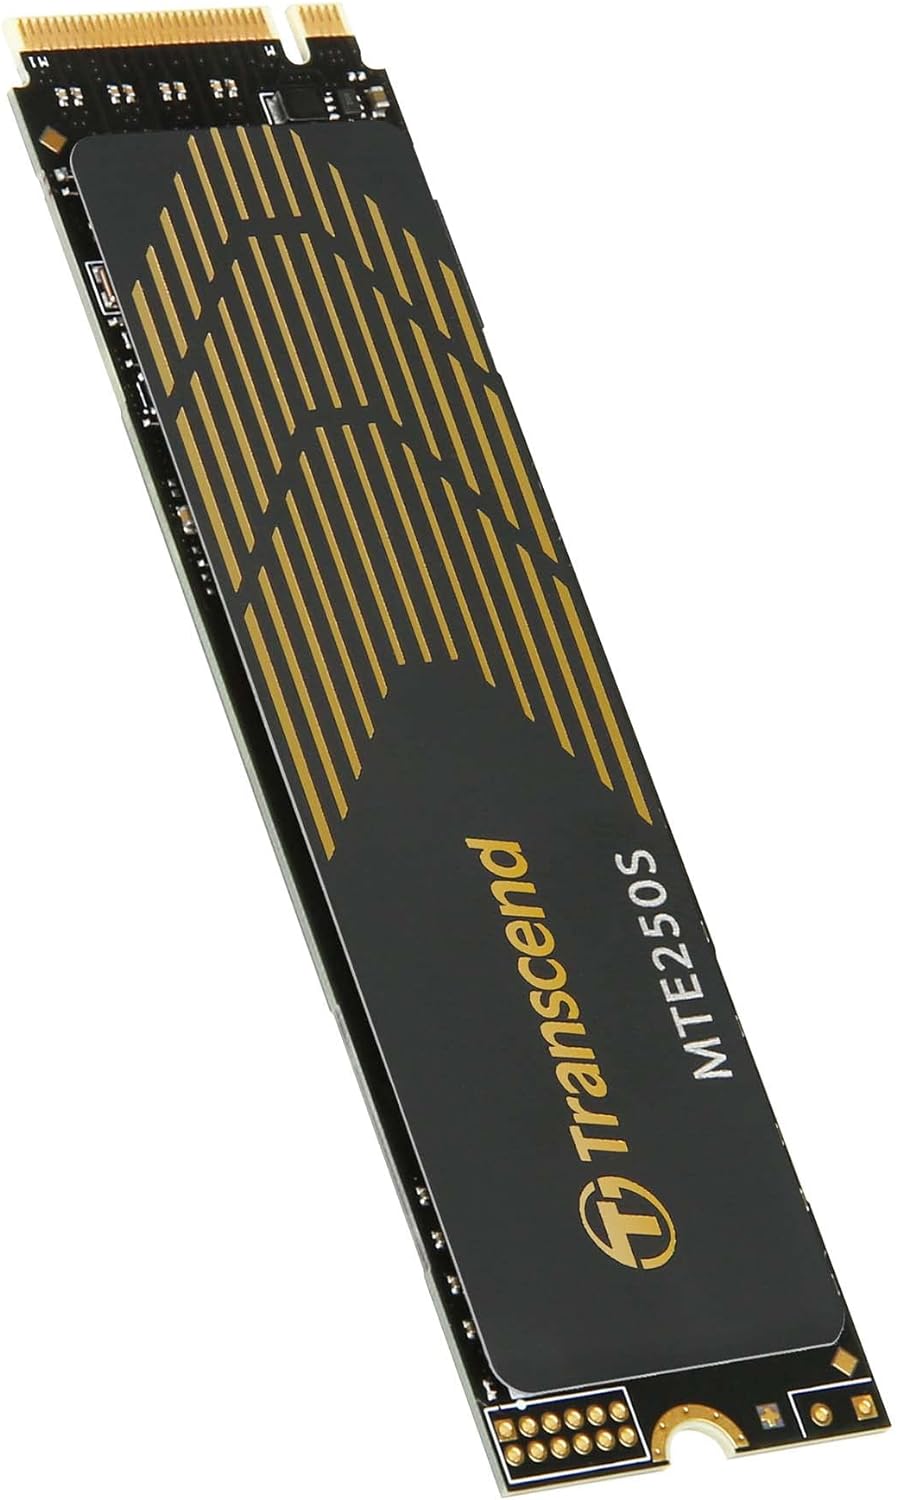 Transcend 2TB MTE250S NVMe Gen4 PCIe M.2 2280 with Graphene Heatsink Up to 7,200MB/s Gaming SSD Internal Hard Drive (Brand New)